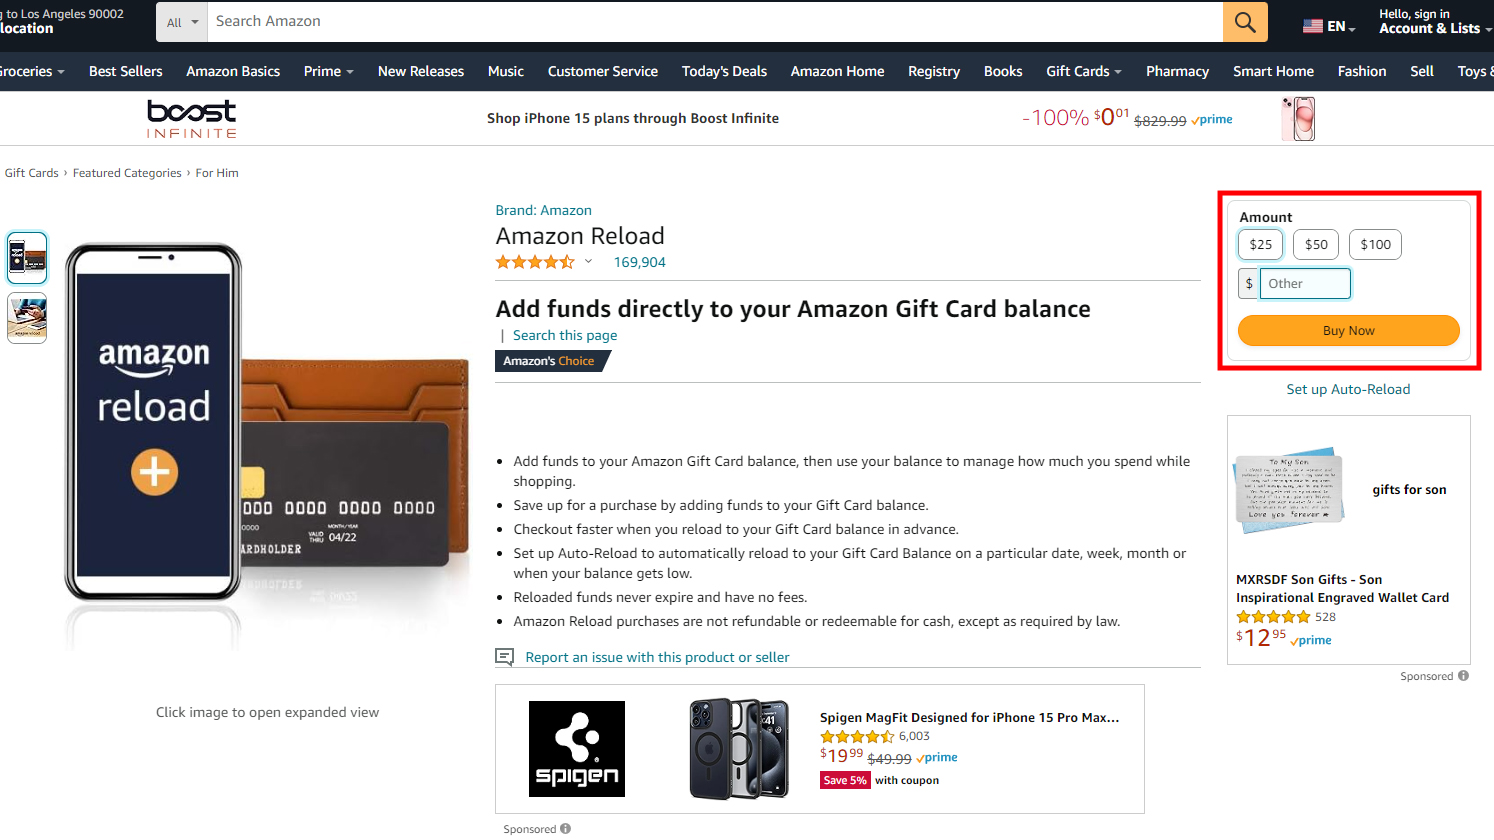 How to add money to your Amazon balance